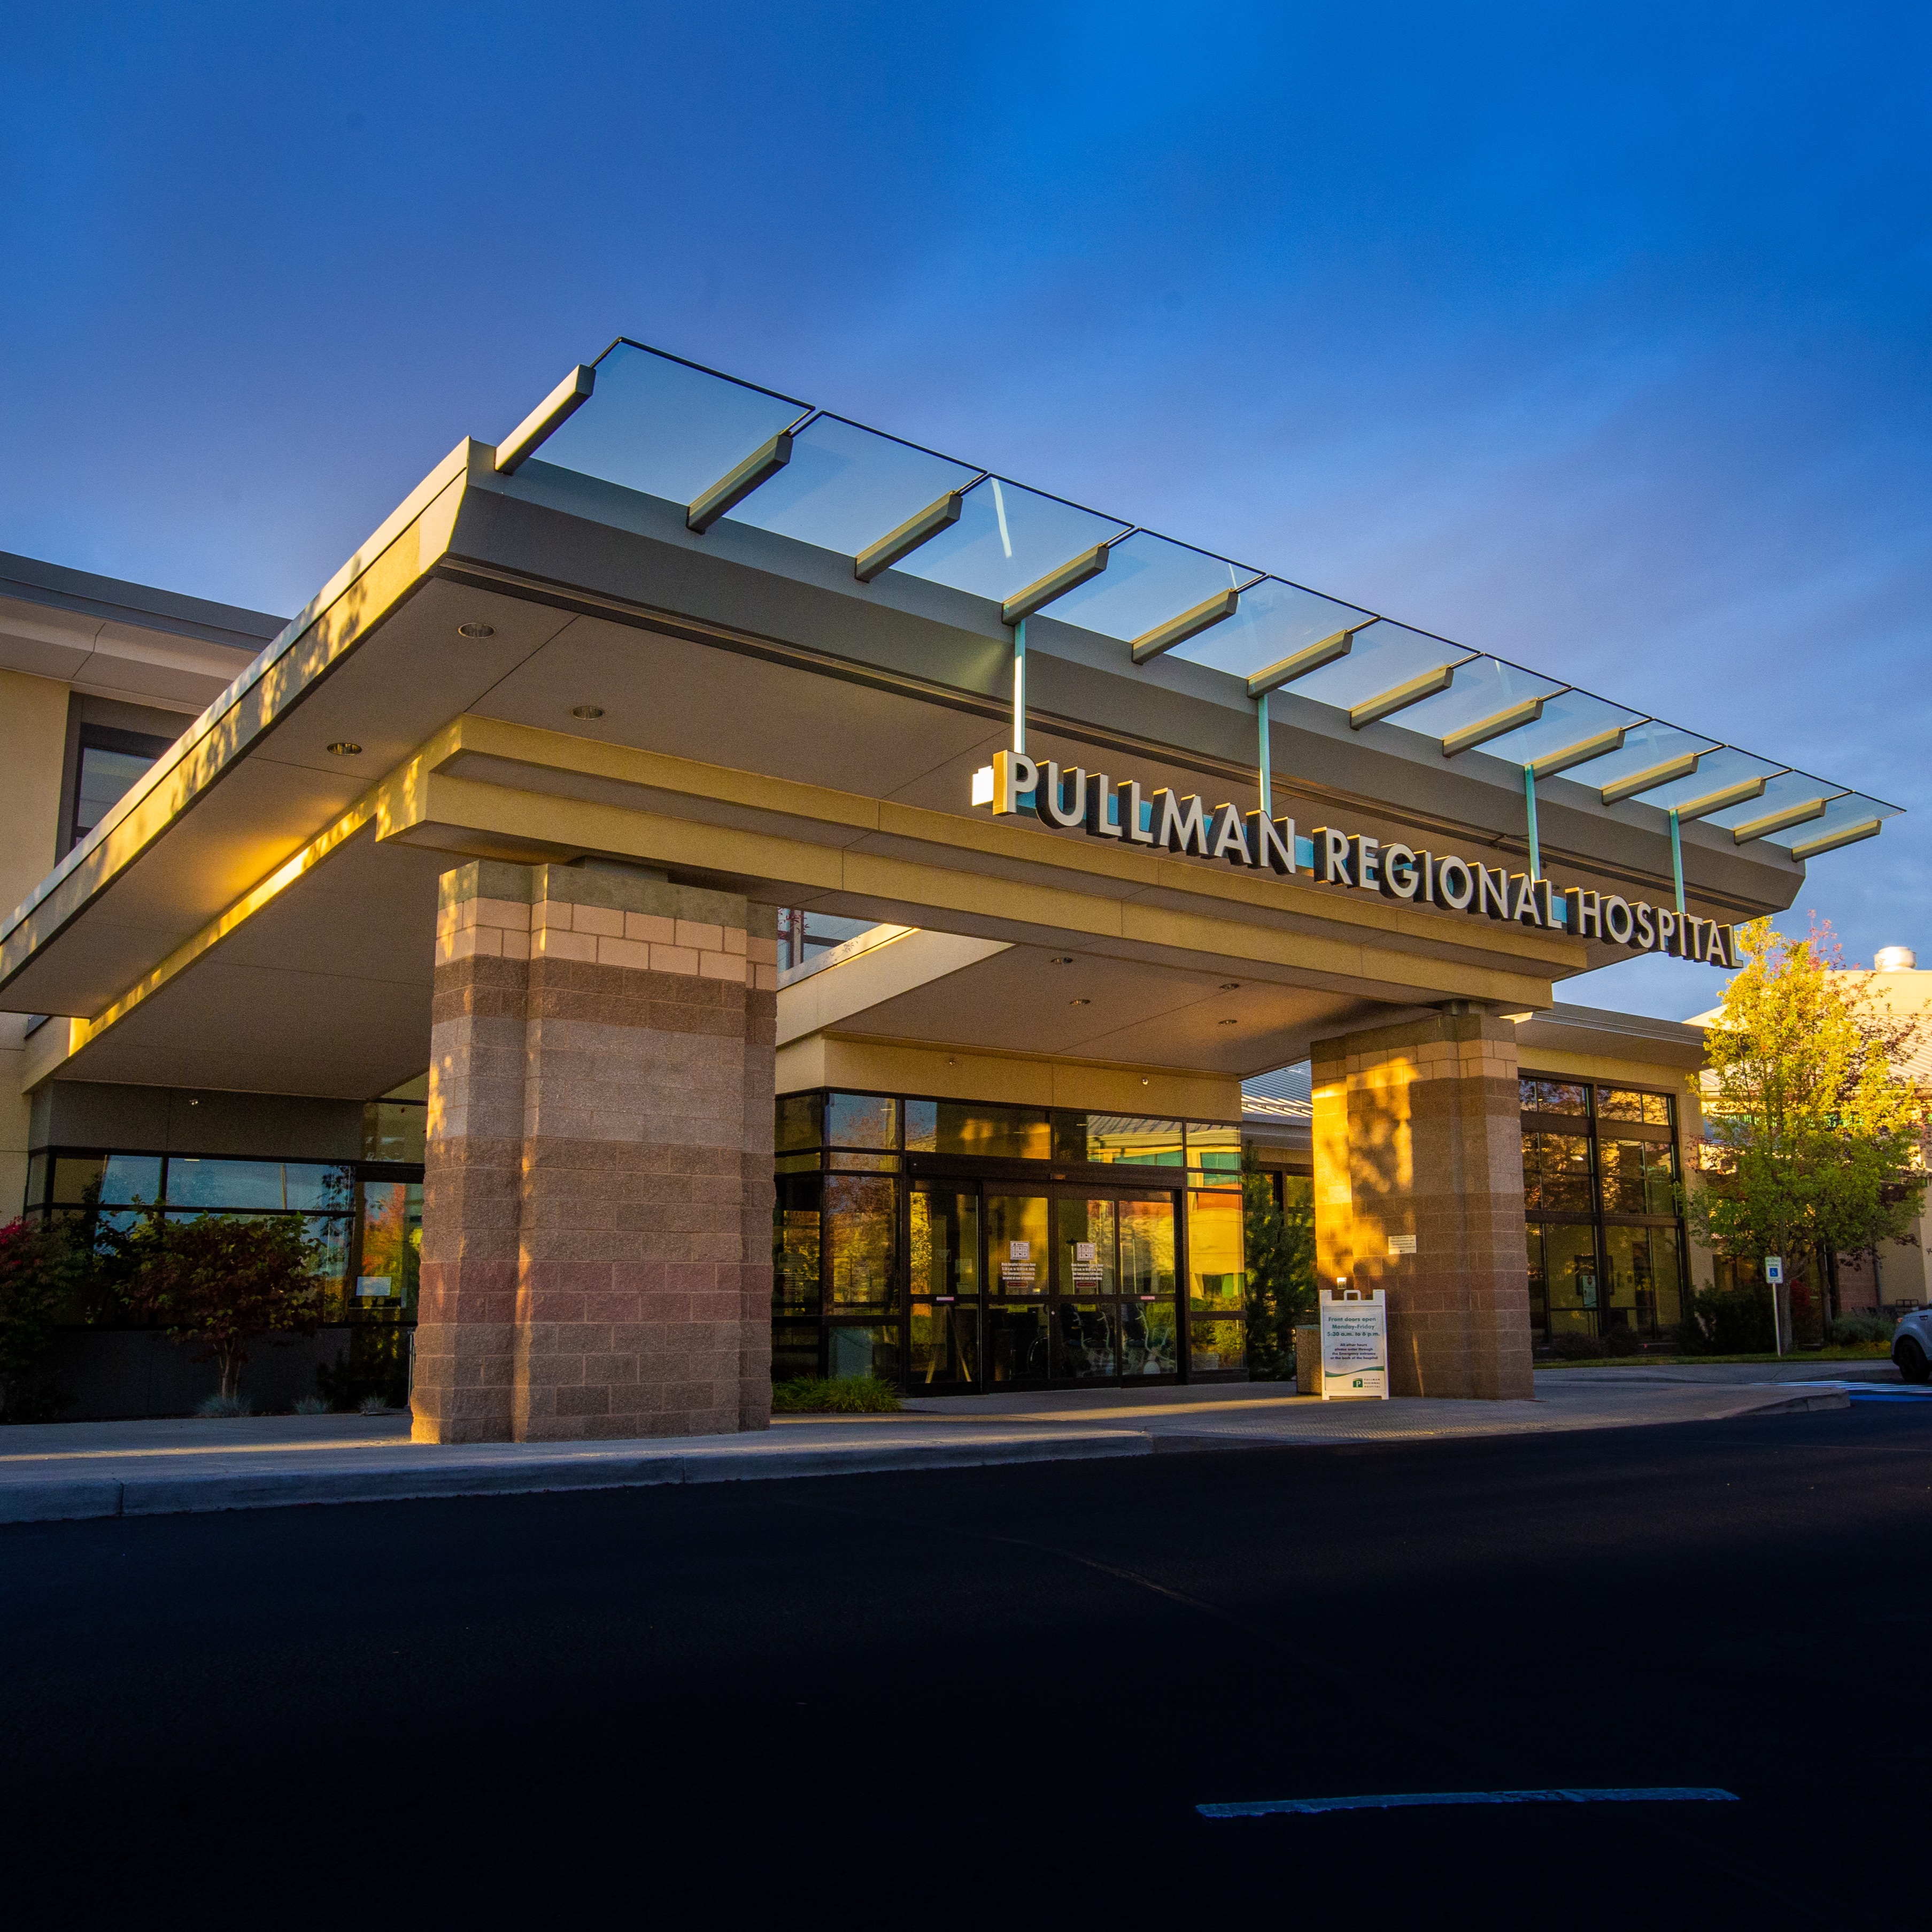 Pullman Regional Hospital Board of Commissioners Seeks Public Comment on Patient Care Expansion Plans